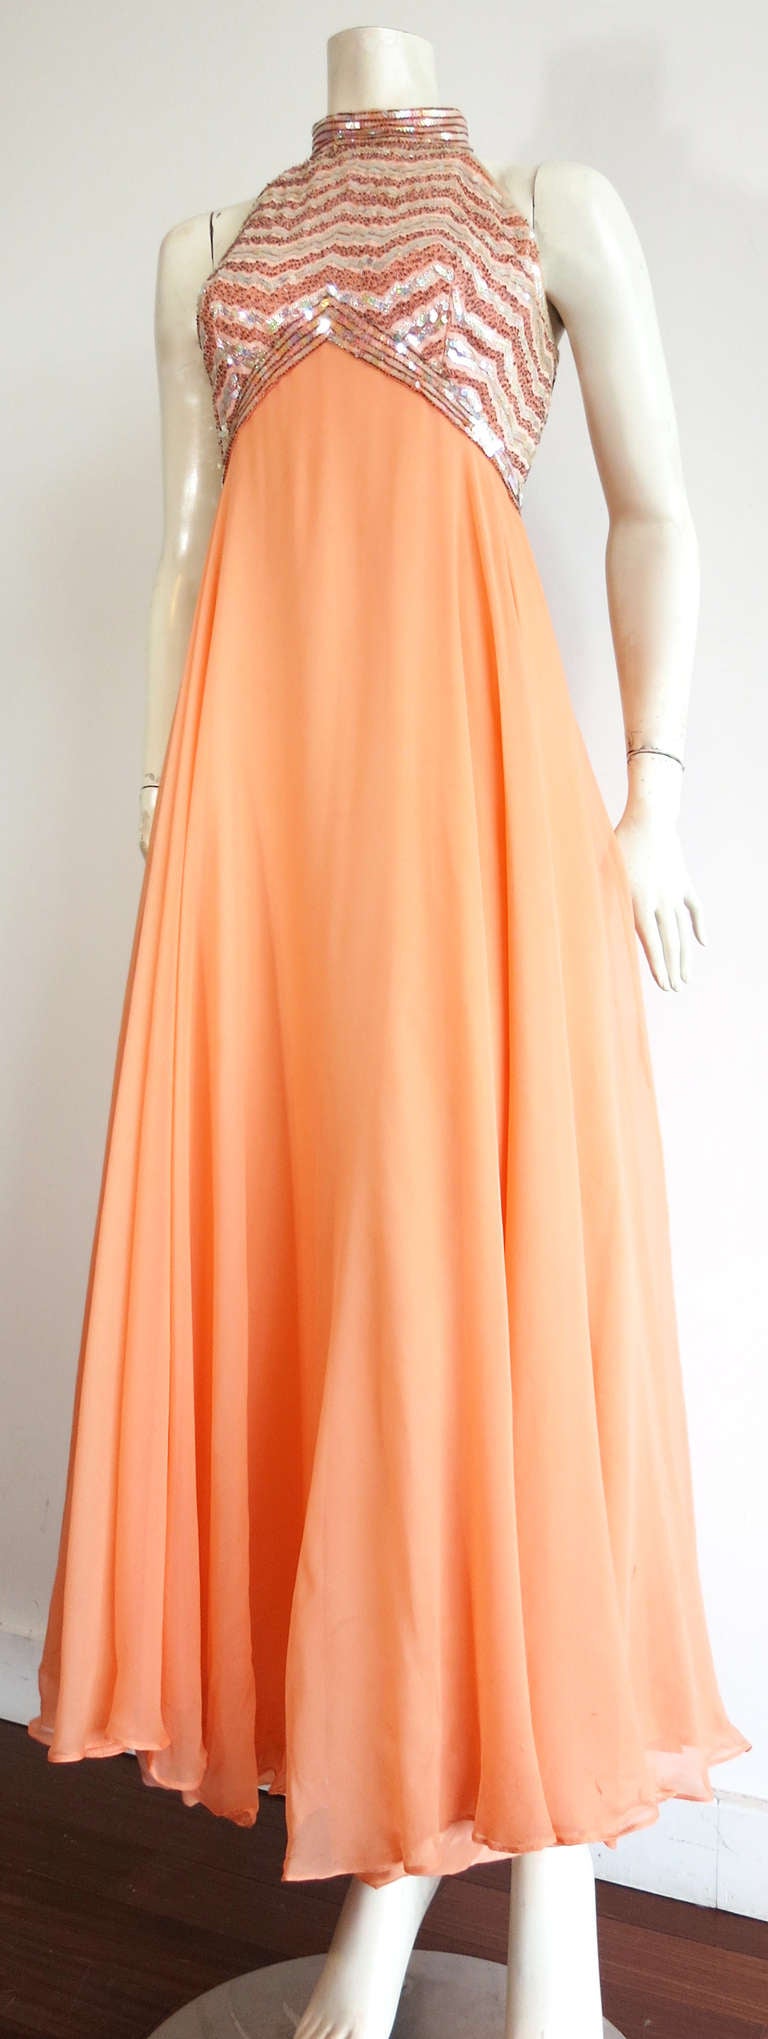 1960's MALCOLM STARR attributed silk empire dress & evening cape set in apricot color, silk chiffon fabric.  

This stunning dress features zig-zag, chevron detailing at the top, empire bodice with sequin and cylinder beading.  The neck features